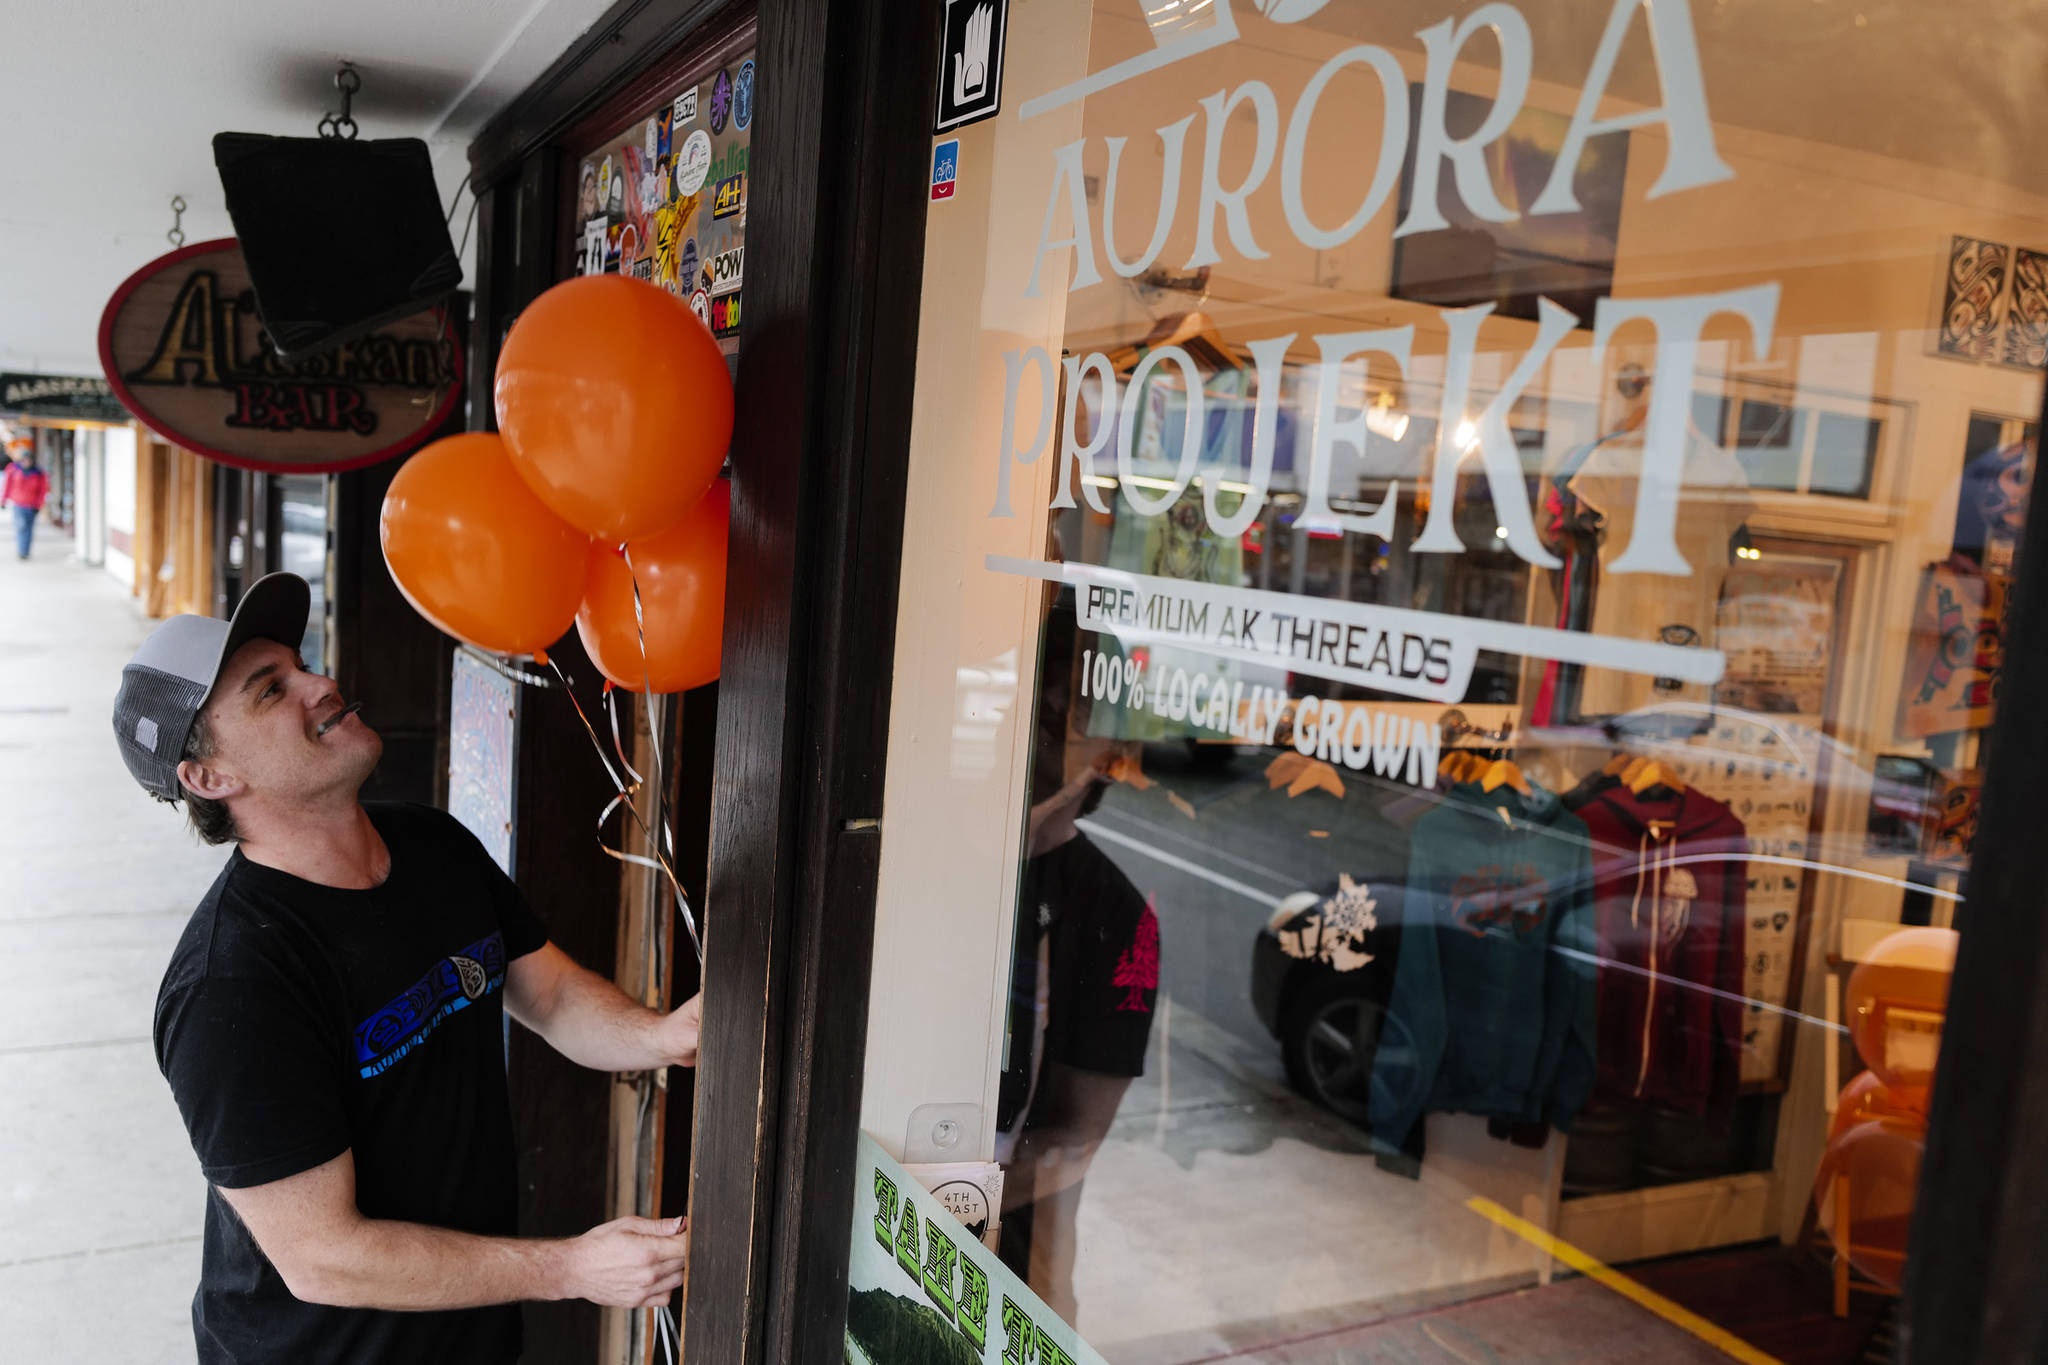 Scott Baxter, owner of Aurora Projekt, puts out balloon for the Trick or Treat Downtown event on Thursday, Oct. 31, 2019. More than 70 business put out orange balloons to participate in the event aimed at young children. (Michael Penn | Juneau Empire)